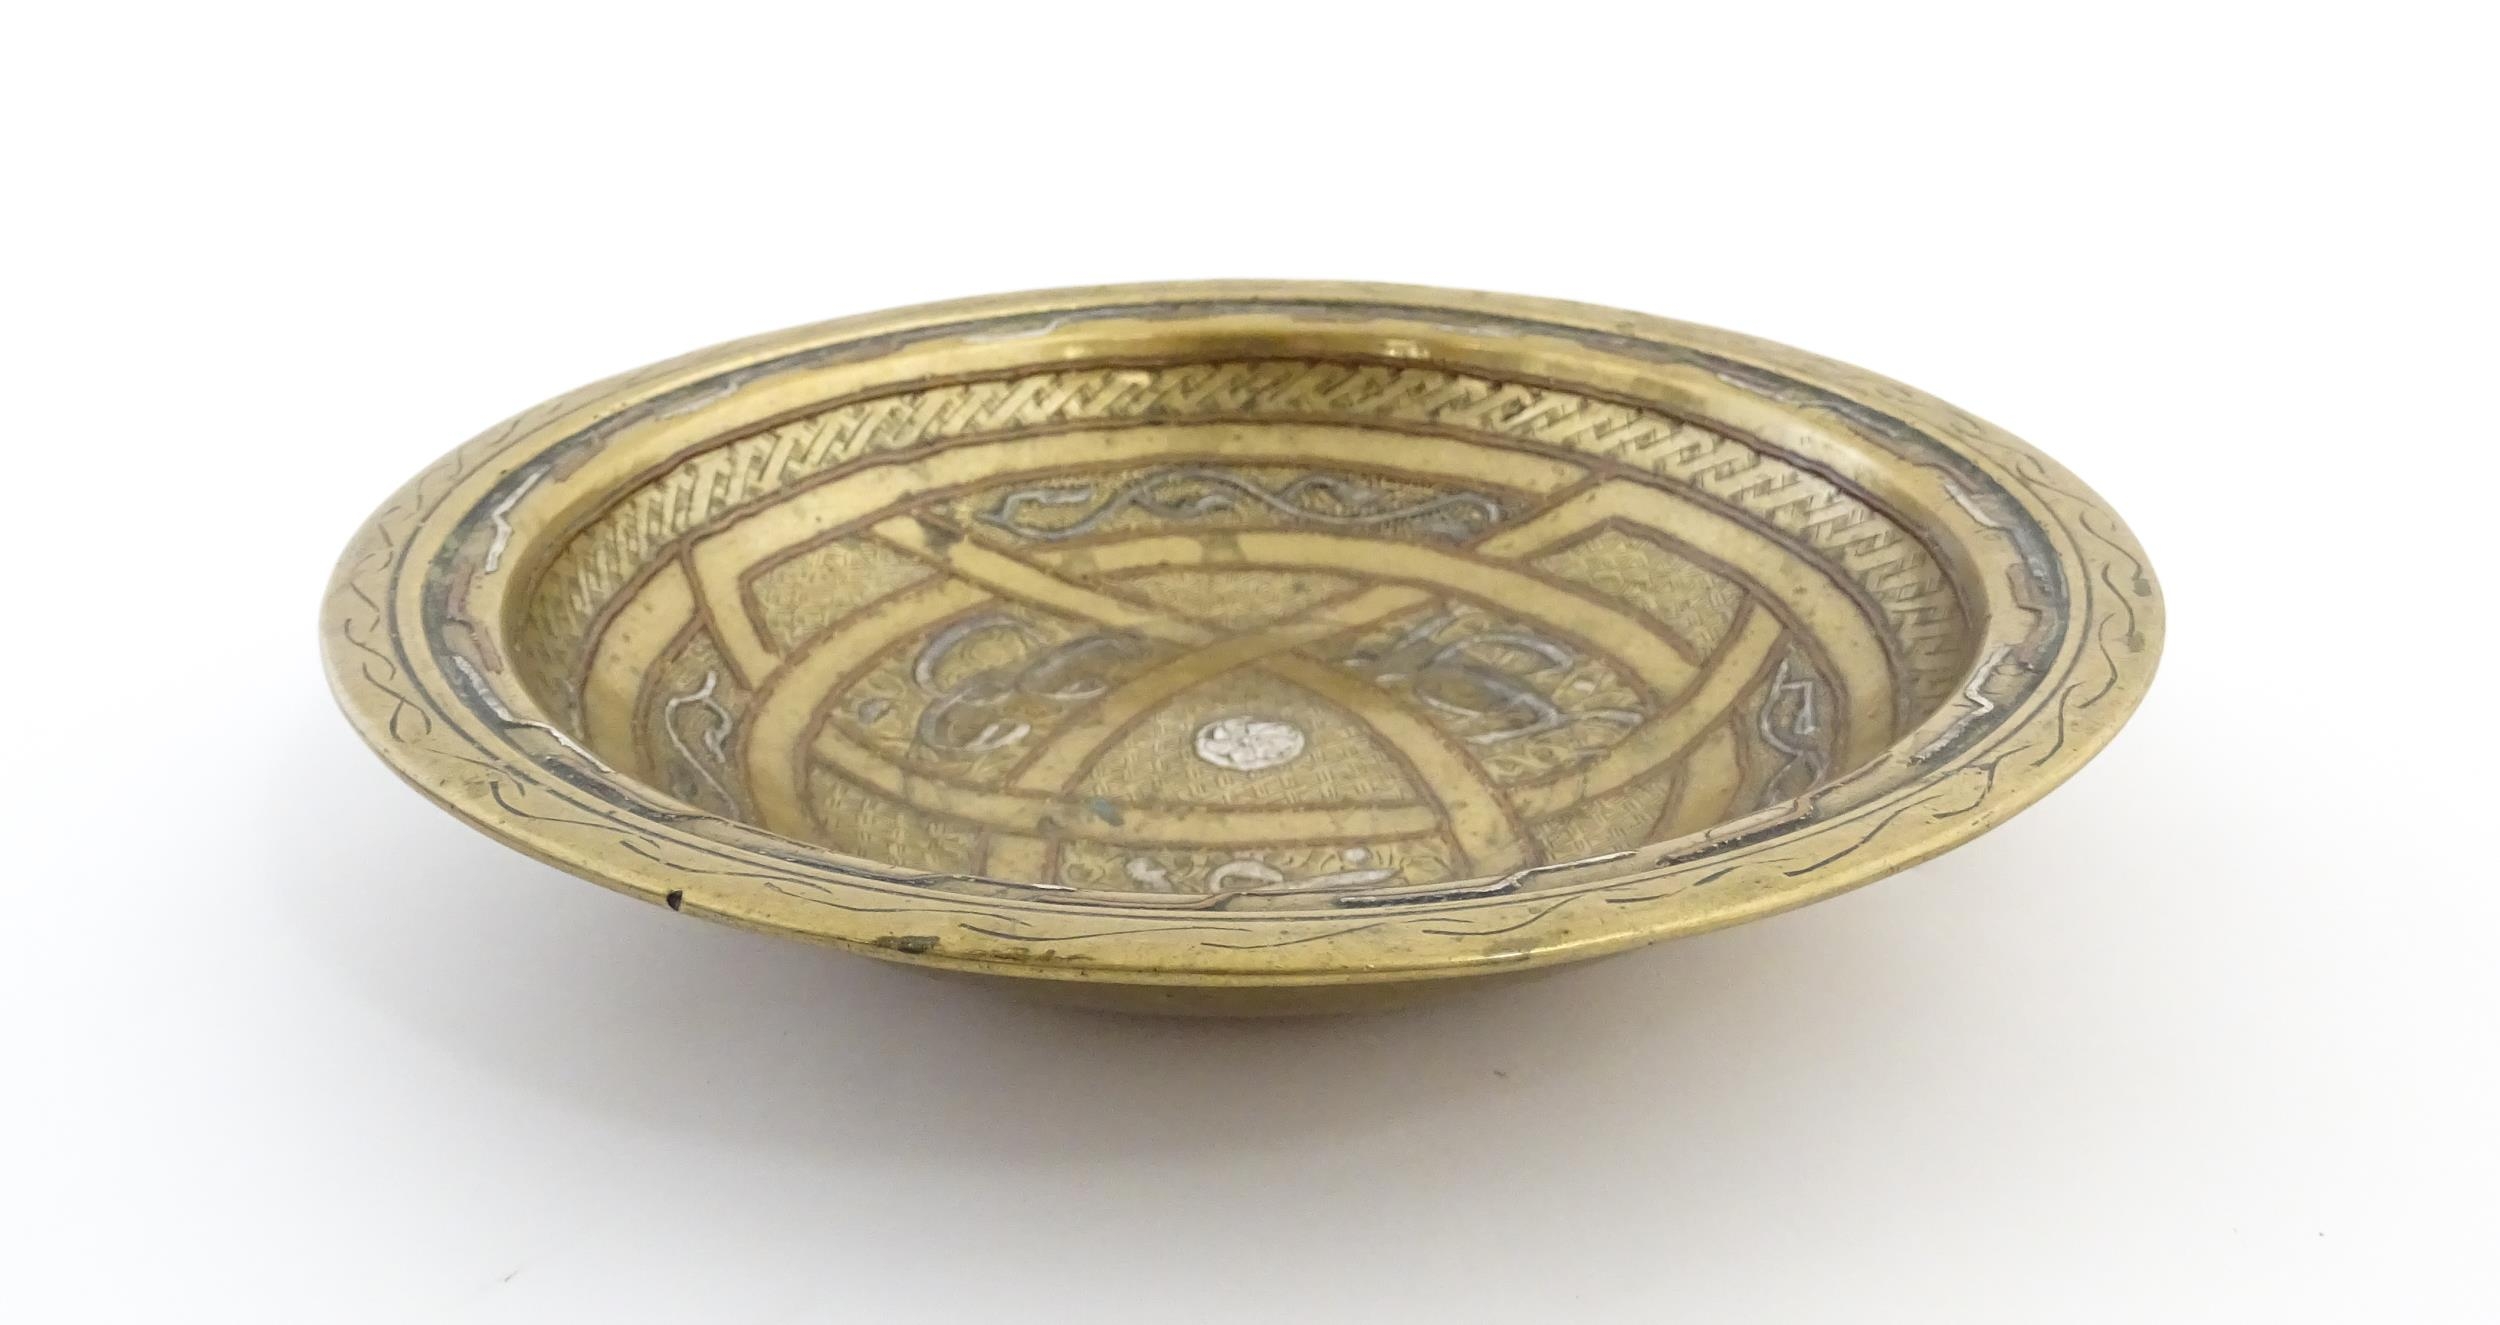 A Middle Eastern brass dish / bowl with incised detail and inlaid white metal and copper - Image 5 of 8